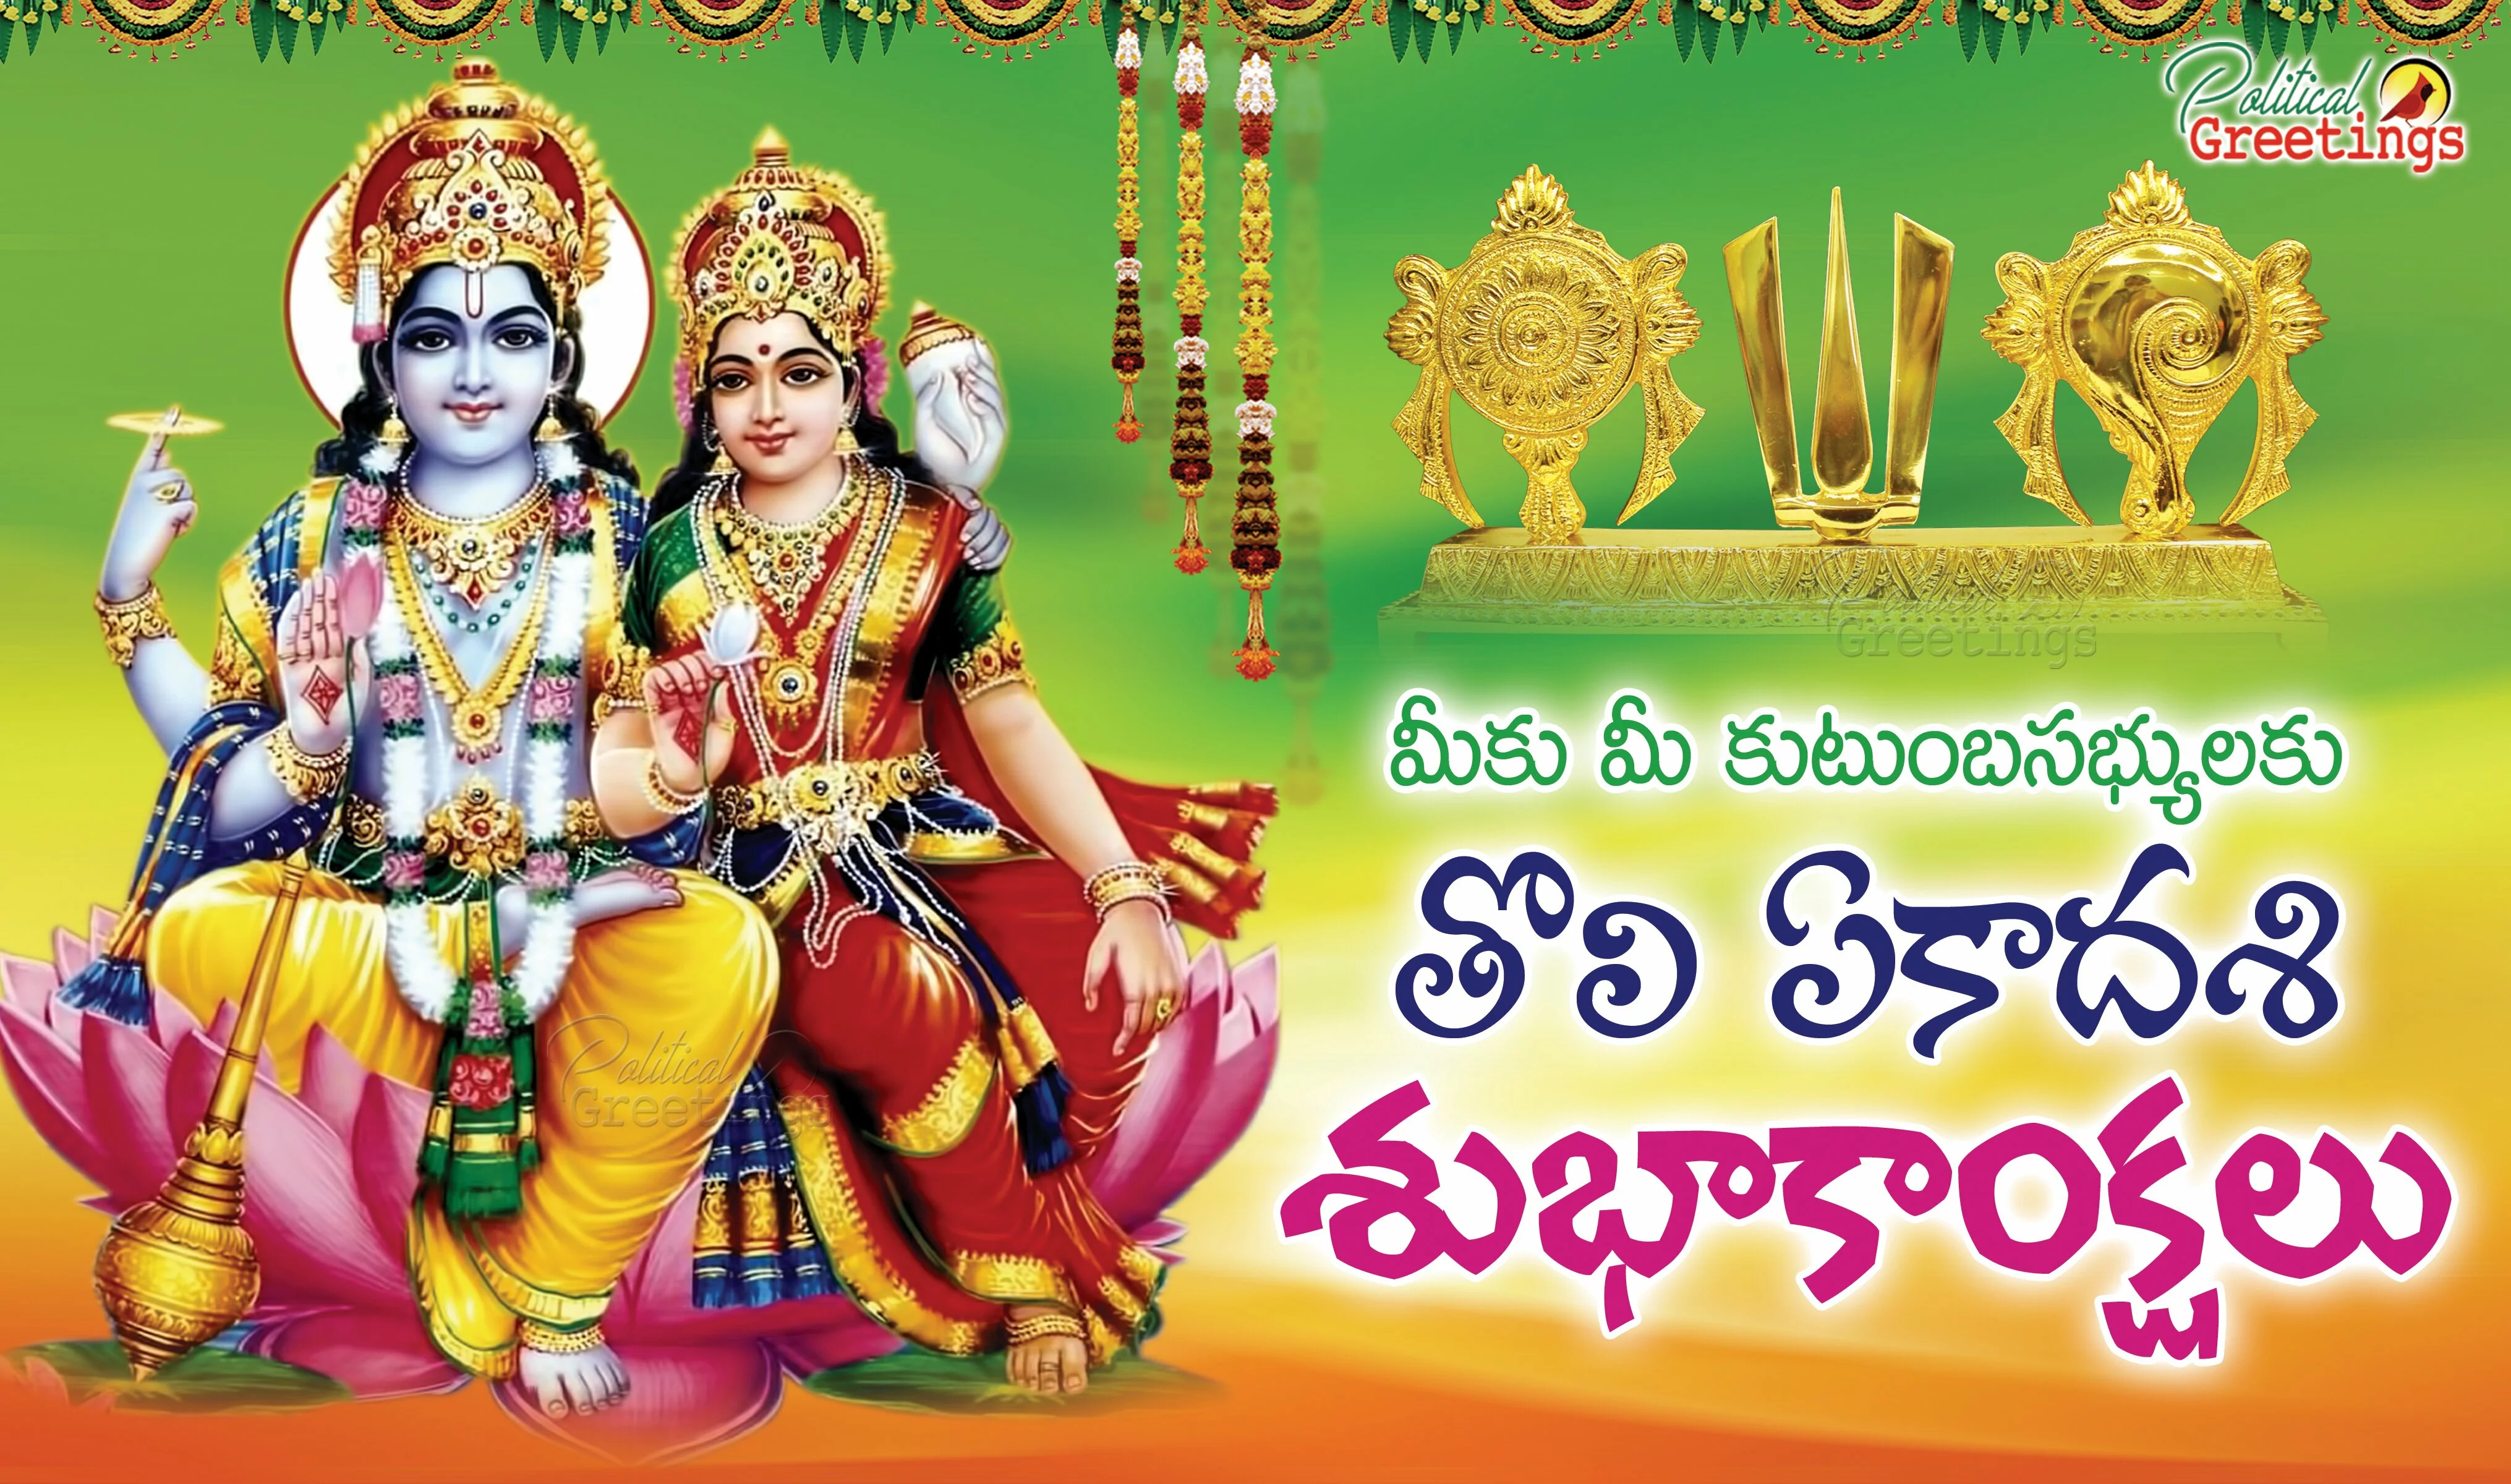 Toli Ekadashi quotes Greetings wishes wallpapers images pictures in telugu